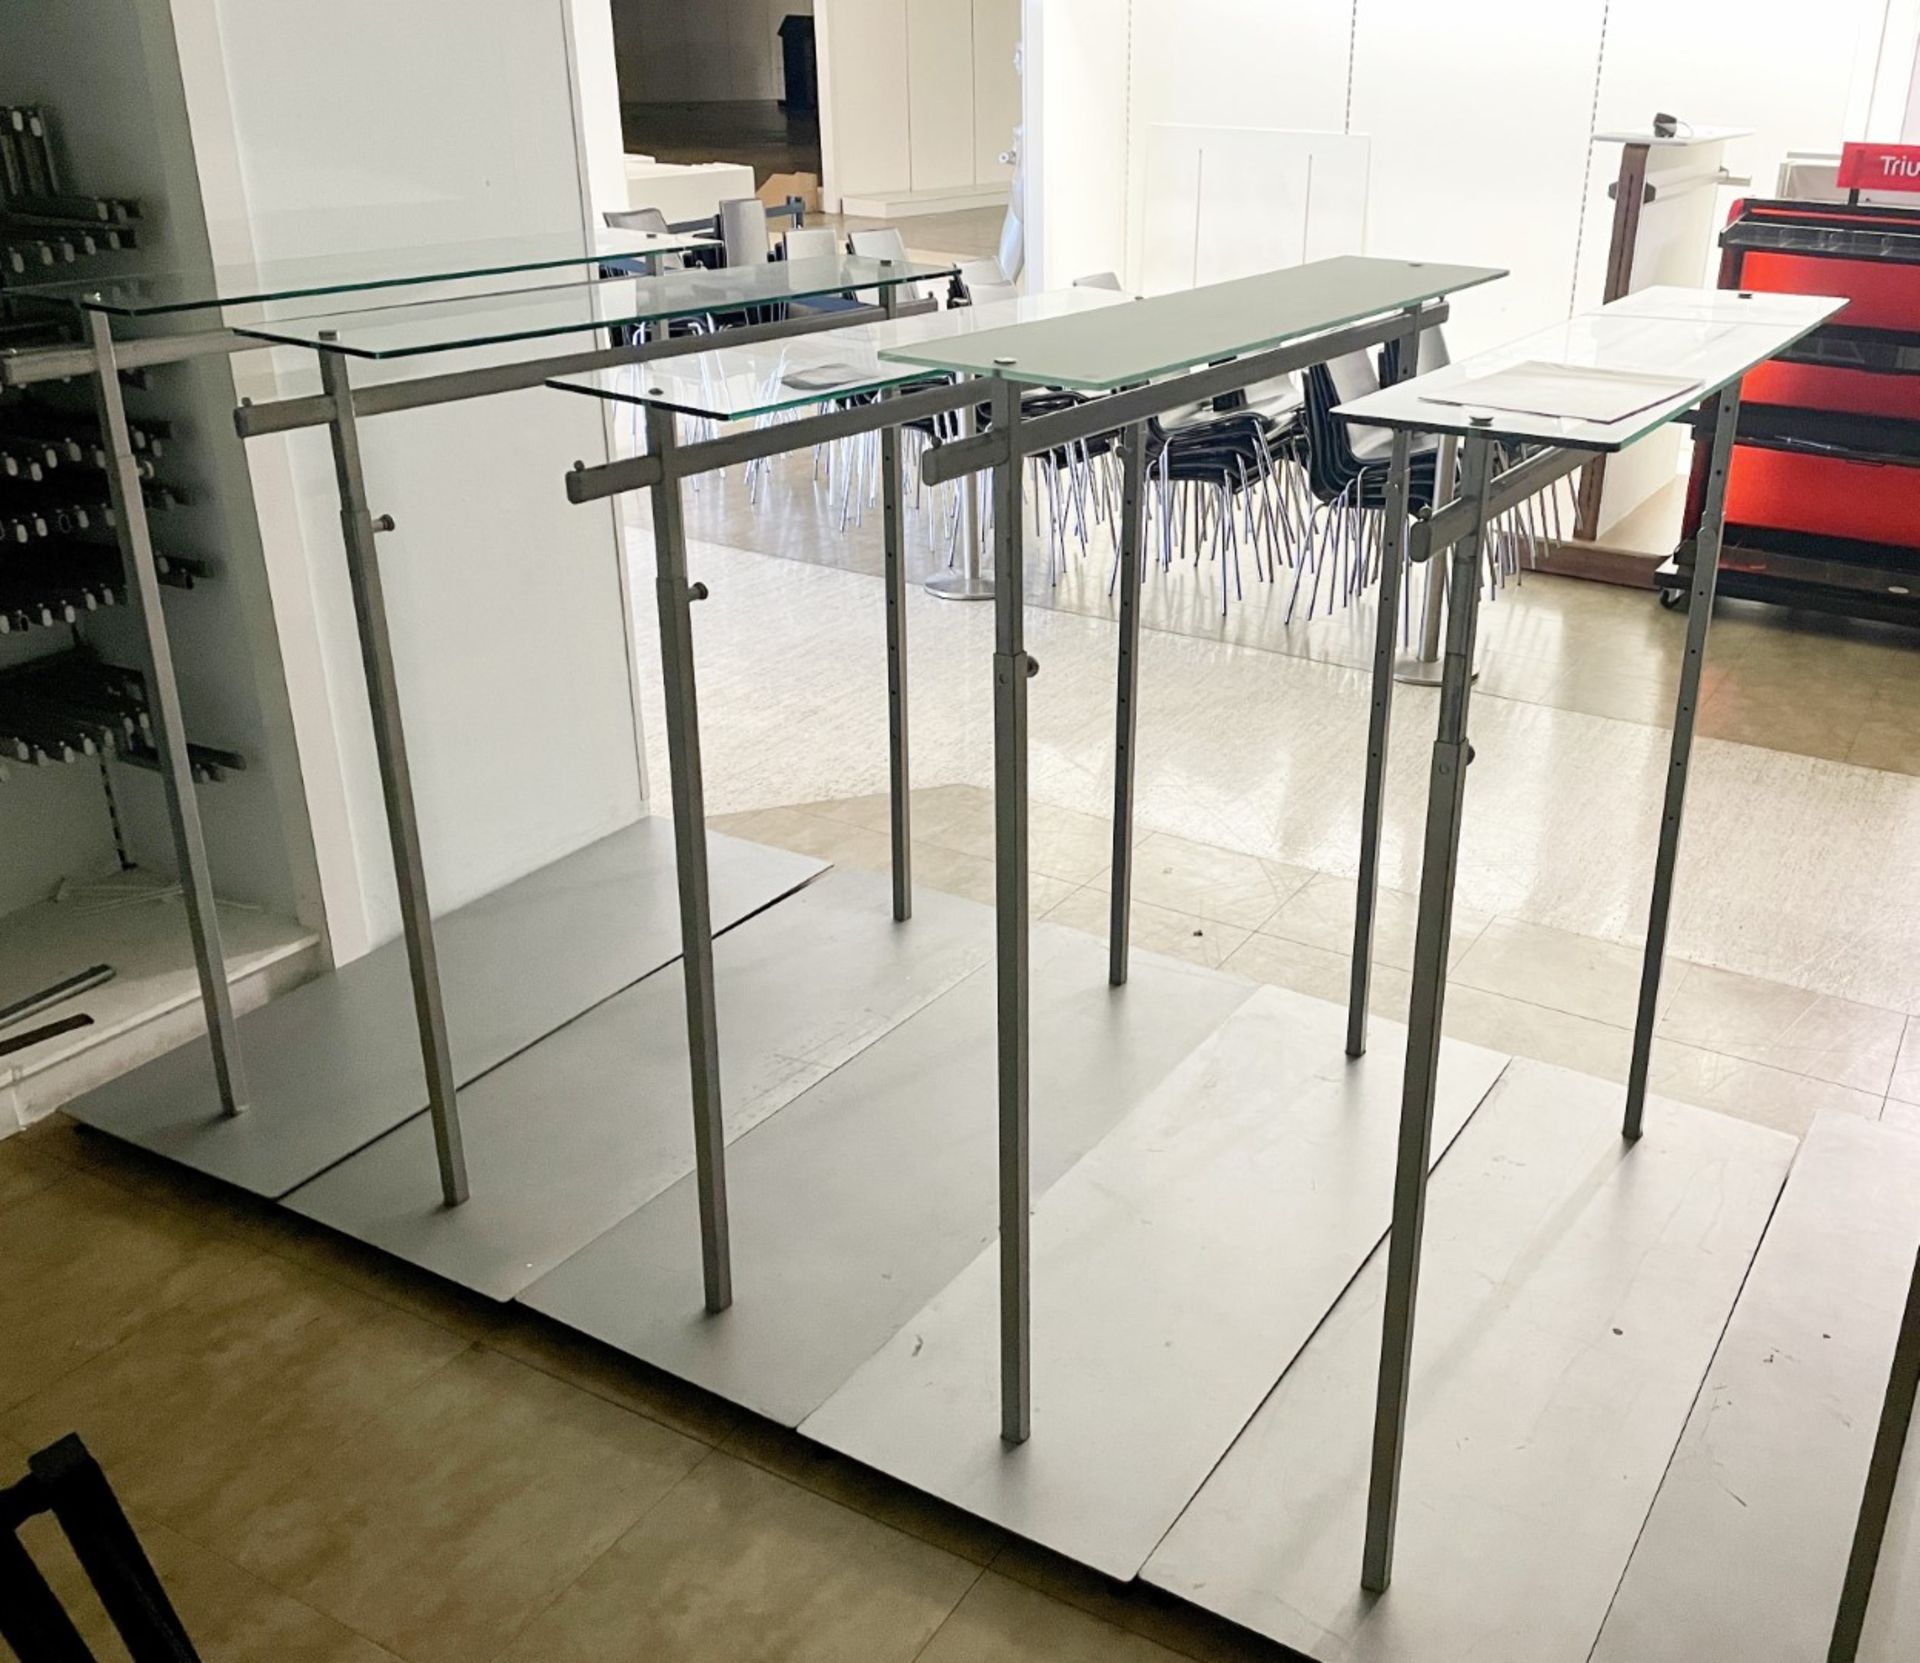 6 x Freestanding Retail Display Clothes Rails - 5 Include Glass Shelf Tops - Size H90 x W150 cms - - Image 4 of 4